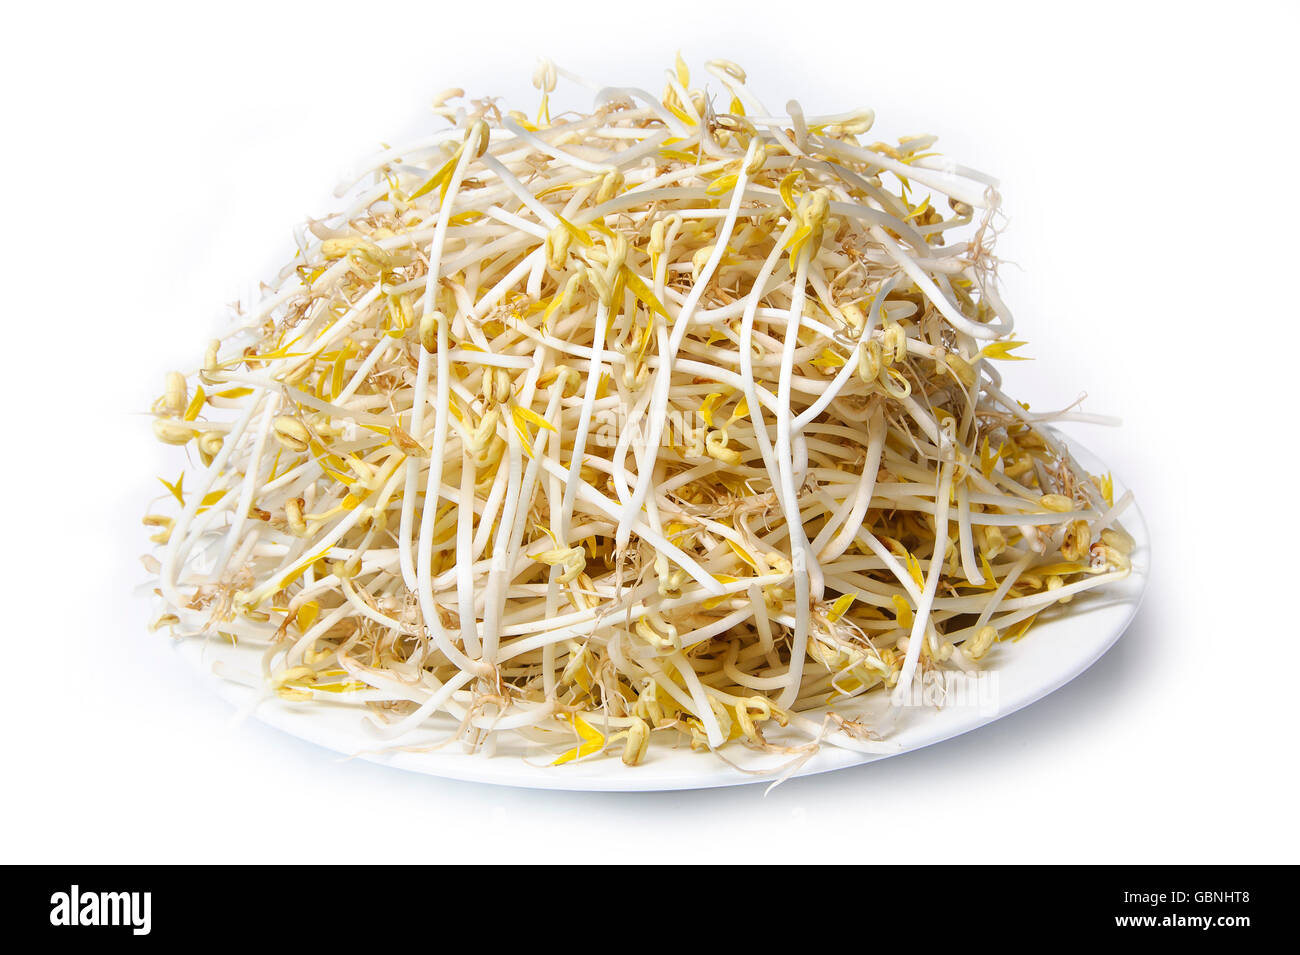 A dish of mung bean sprout isolated on a white background Stock Photo